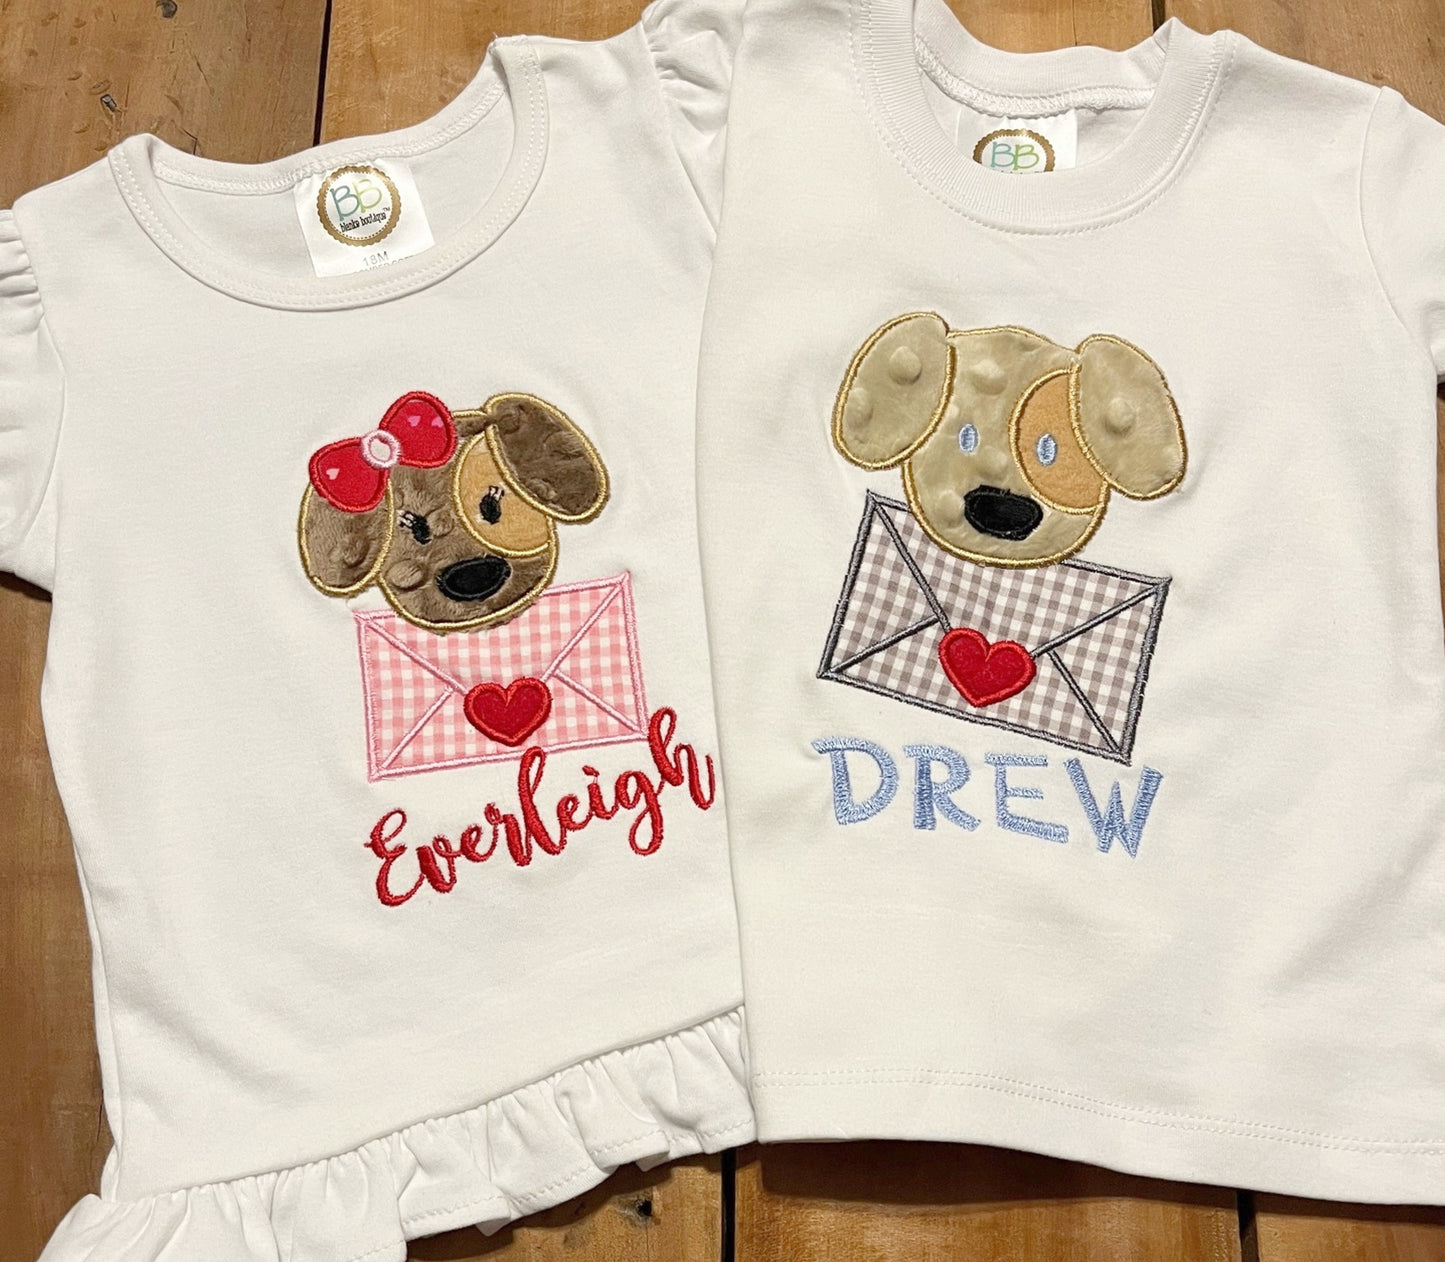 Girl dog Valentine's Day Shirt, embroidered design of a puppy holding an envelope and personalized with child's name. Name shown in Everleigh font. Boy Puppy shirt name shown in carson font